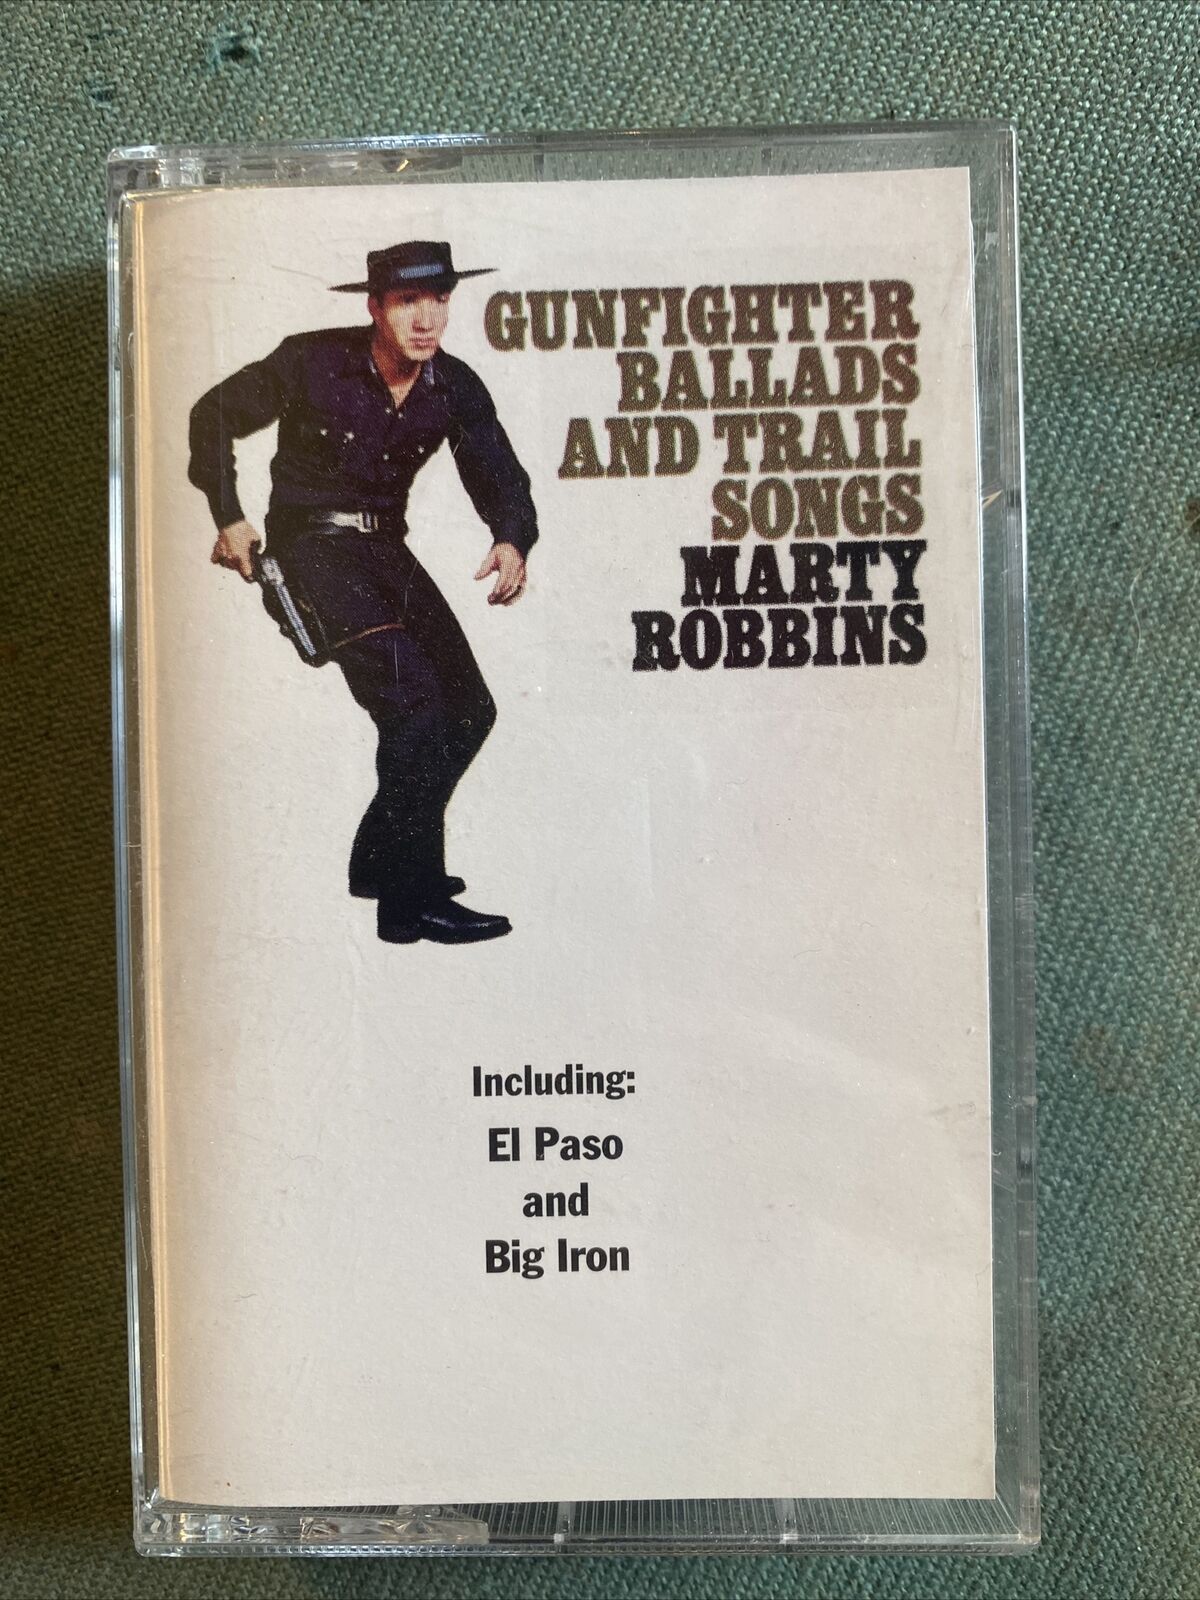 Gunfighter Ballads And Trail Songs by Marty Robbins USED Cassette